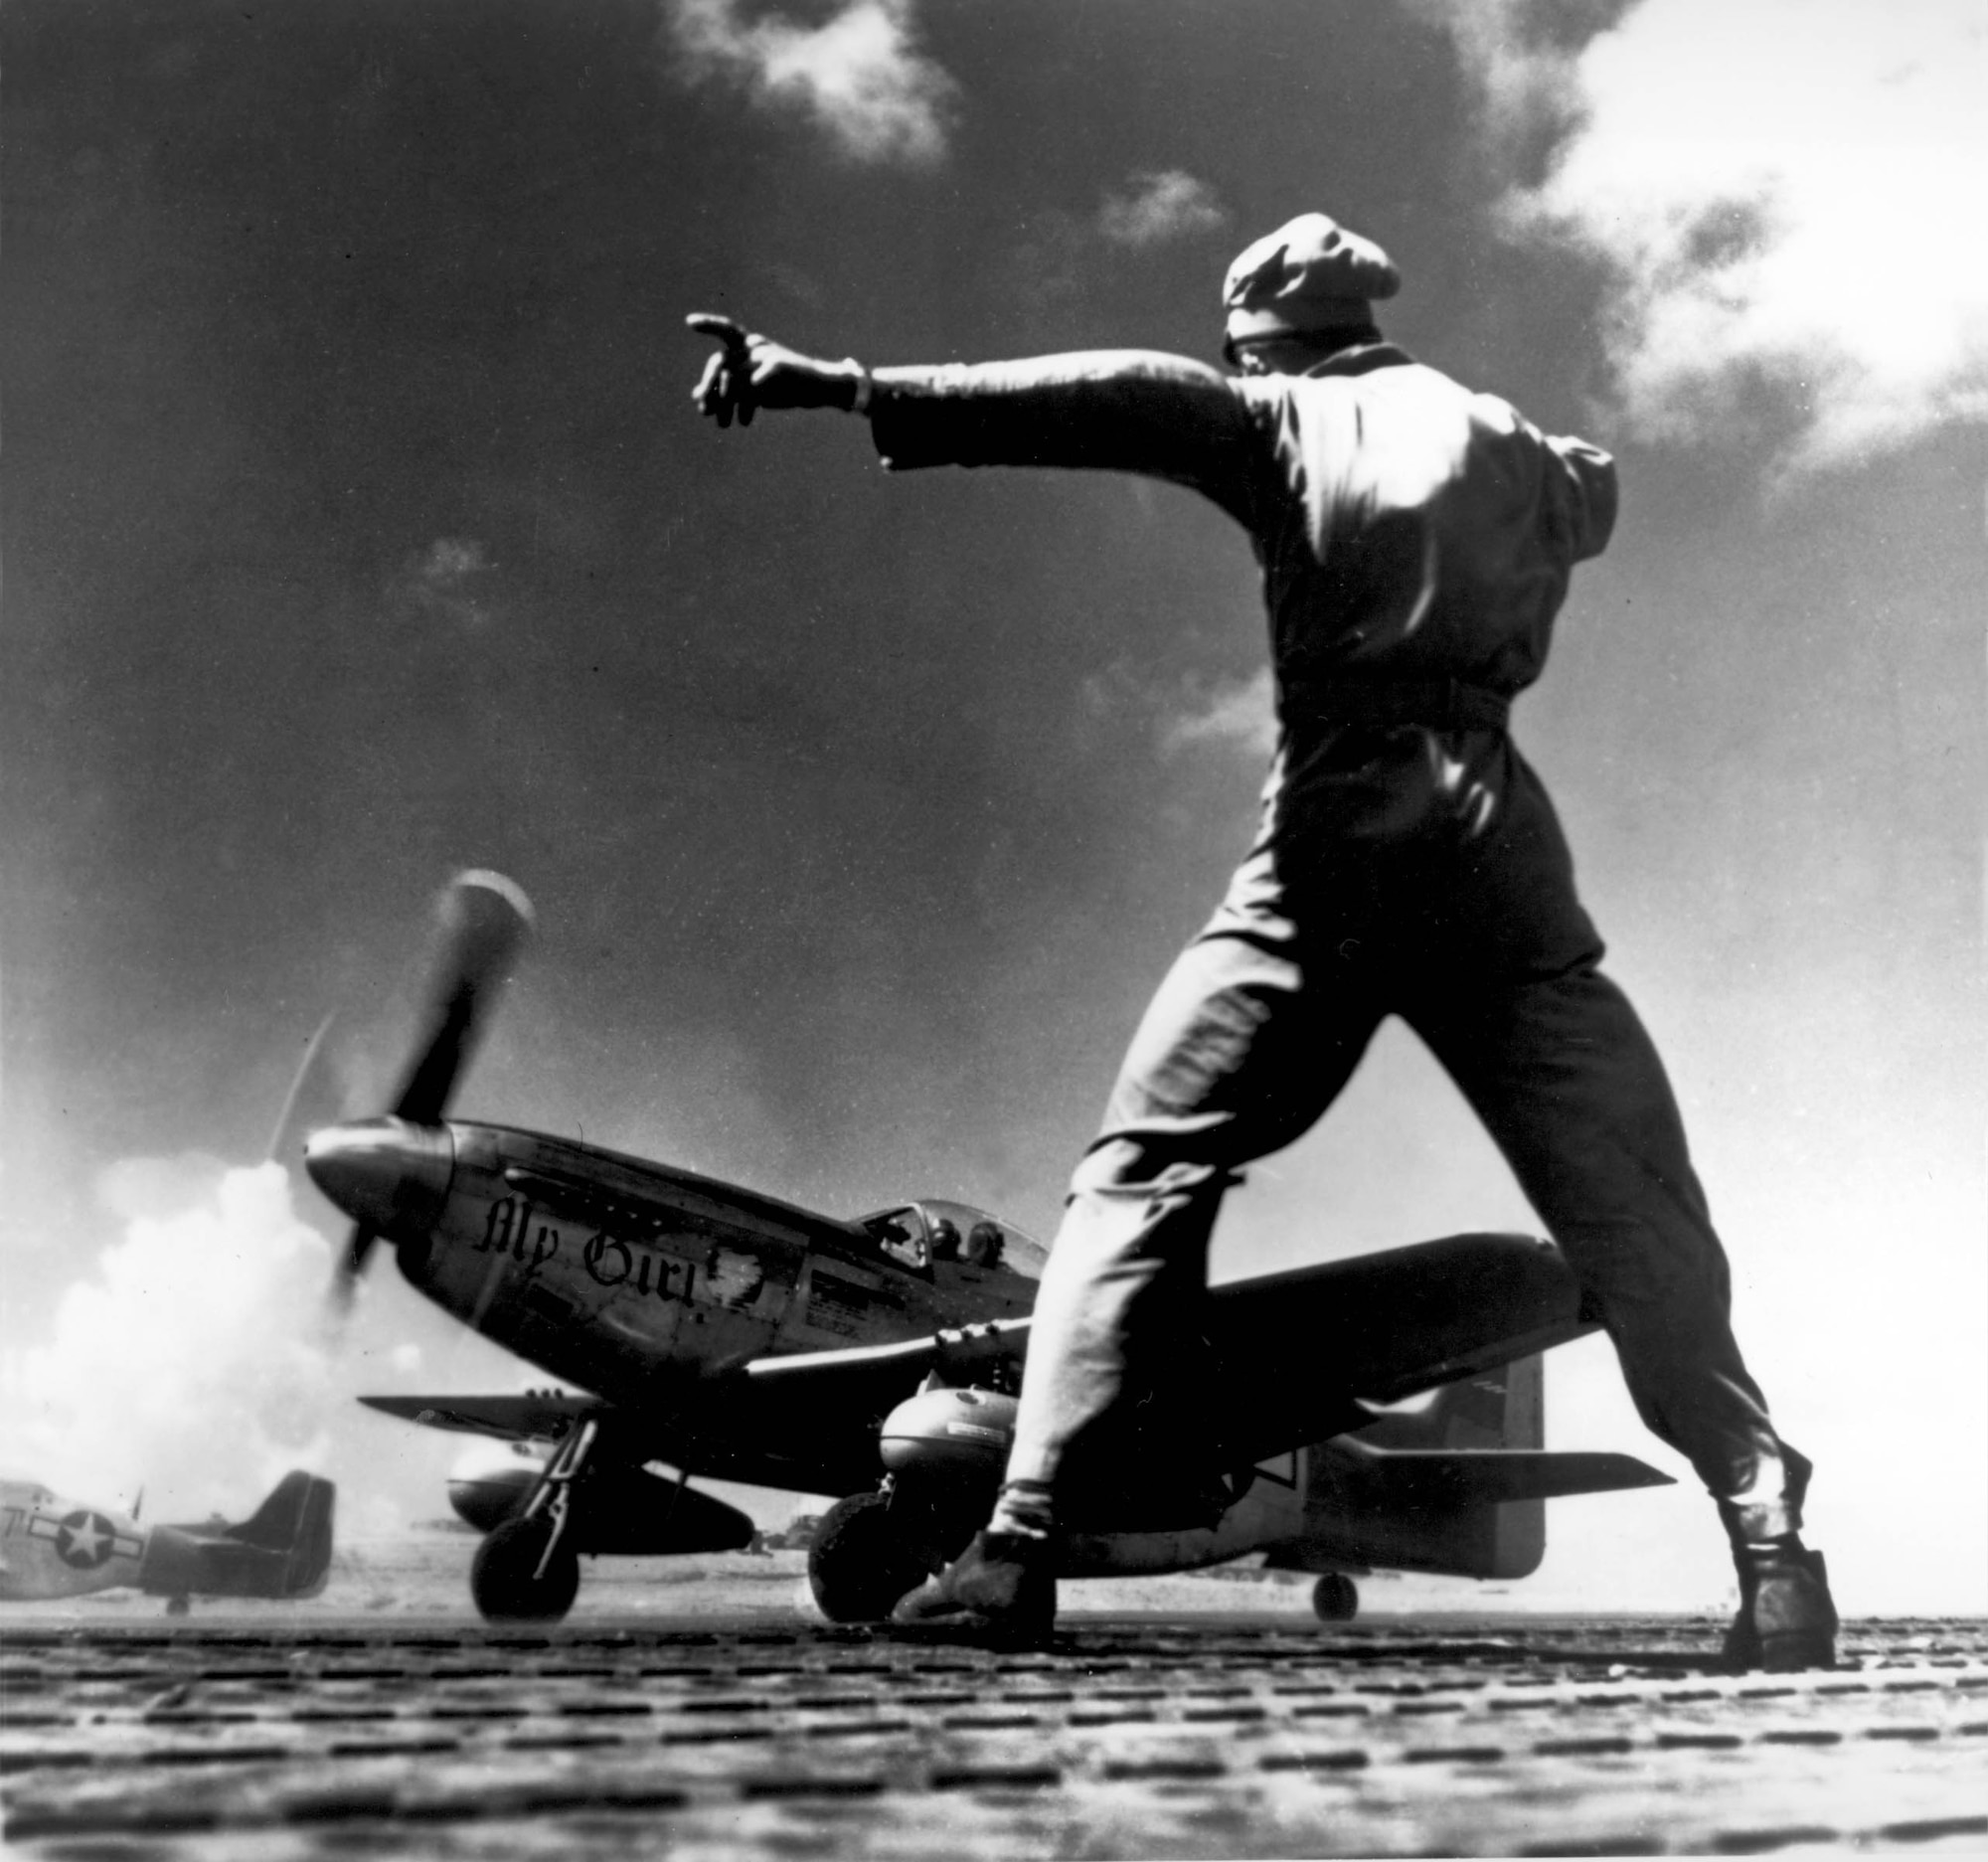 ANDERSEN AIR FORCE BASE, Guam -"MY GIRL" a P-51 takes off from Iwo Jima. From this hard-won base U.S. Air Force fighters escorted the B-29's on bombing missions to Japan, and also attacked the Empire on their own. Image was used in the book, "Third Report of the C.G. of the A.A.F. to the Secretary of War". 1945 (U.S. Air Force photo)